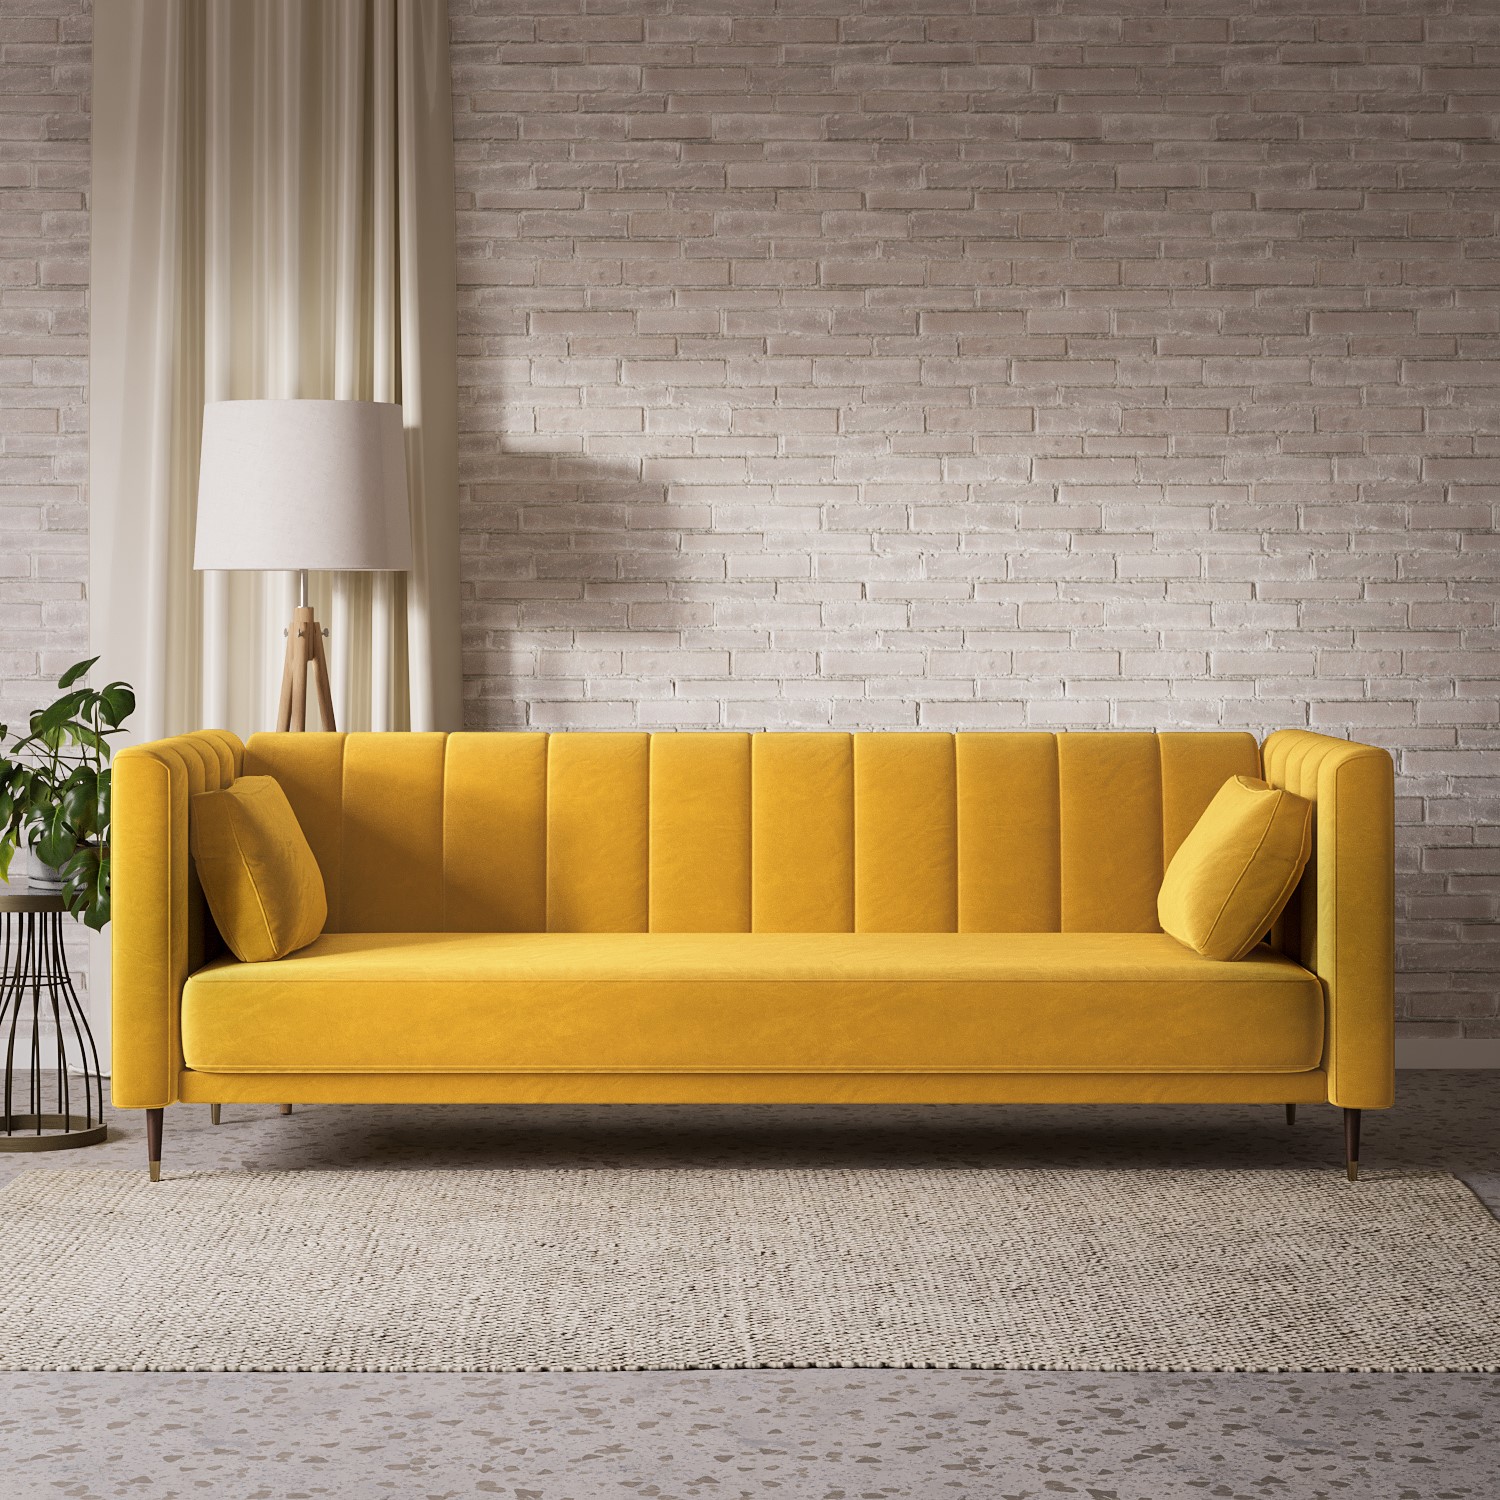 Photo of Yellow velvet click clack sofa bed - seats 3 - mabel